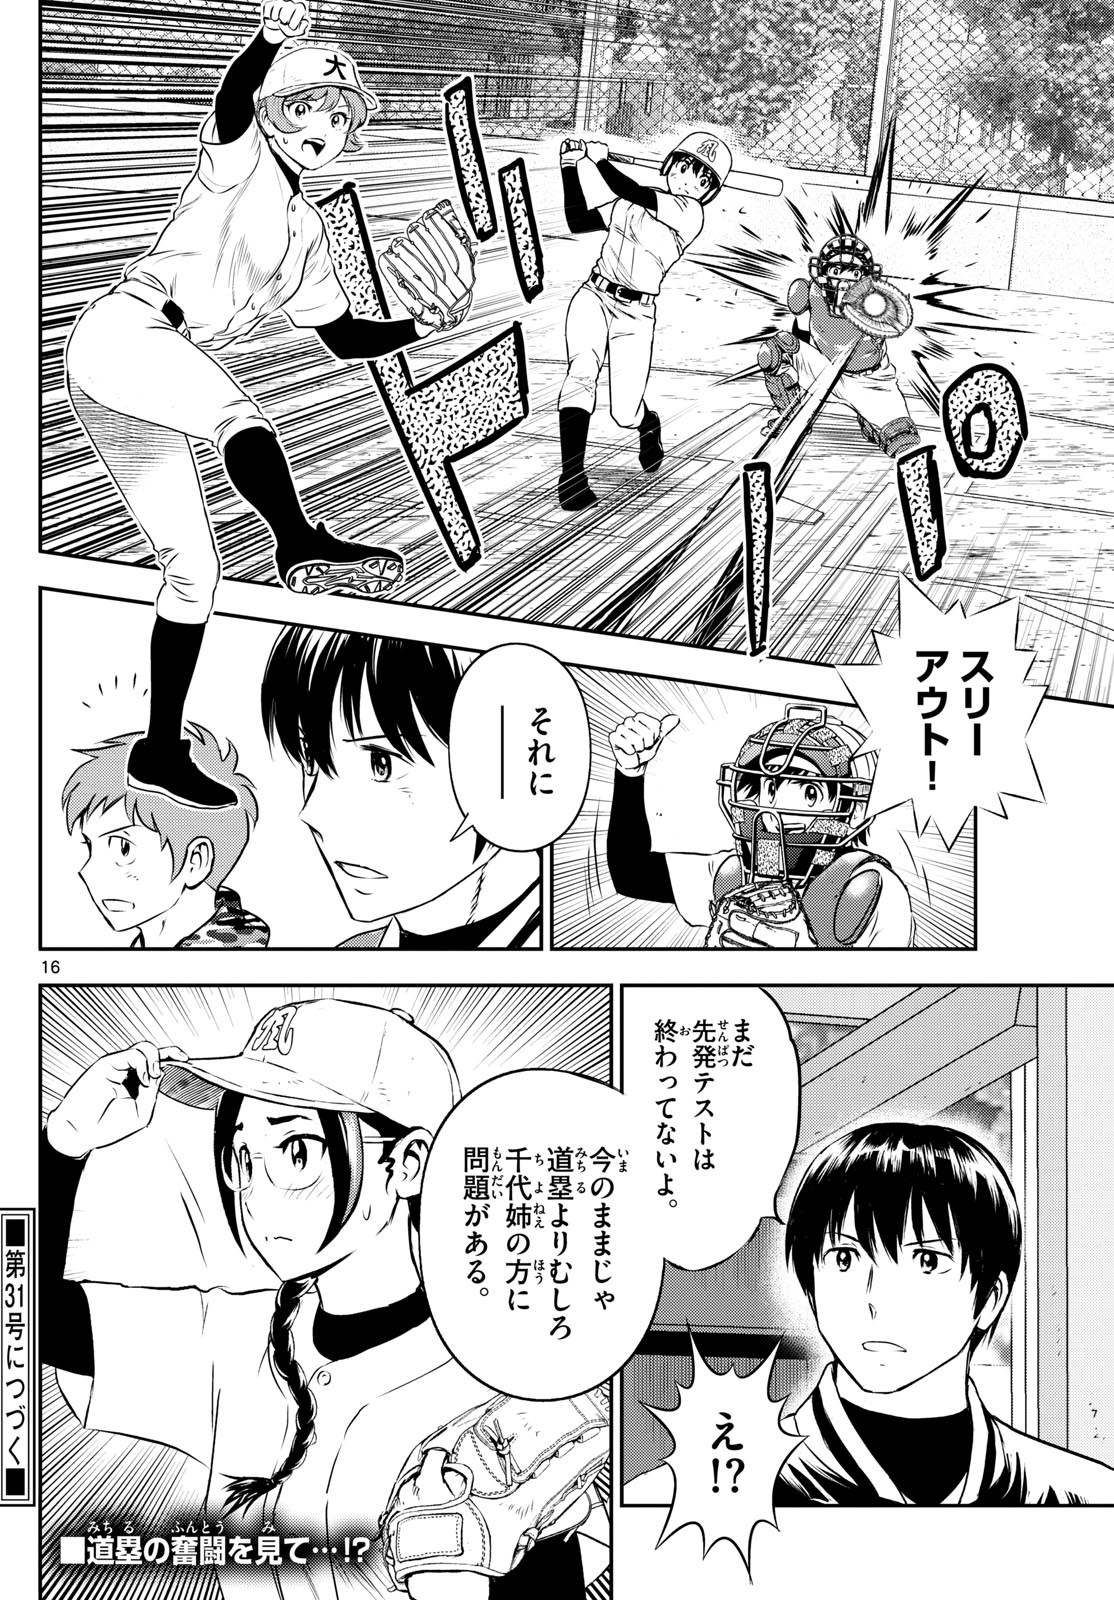 Major 2nd - メジャーセカンド - Chapter 281 - Page 16